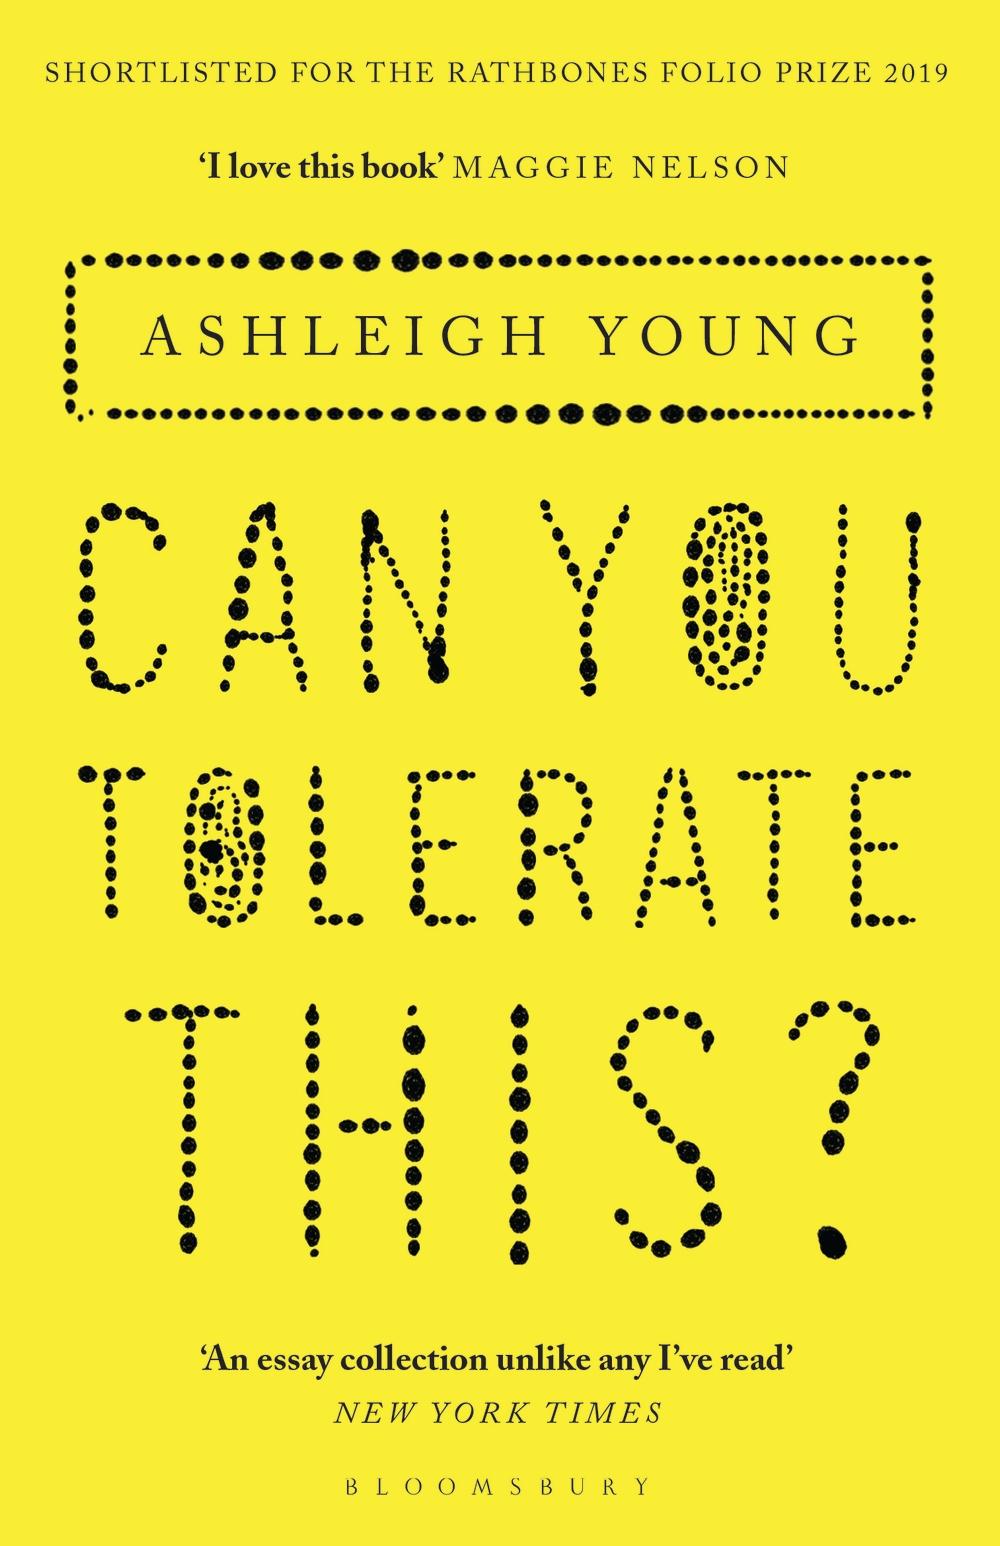 Can You Tolerate This? - Ashleigh Young